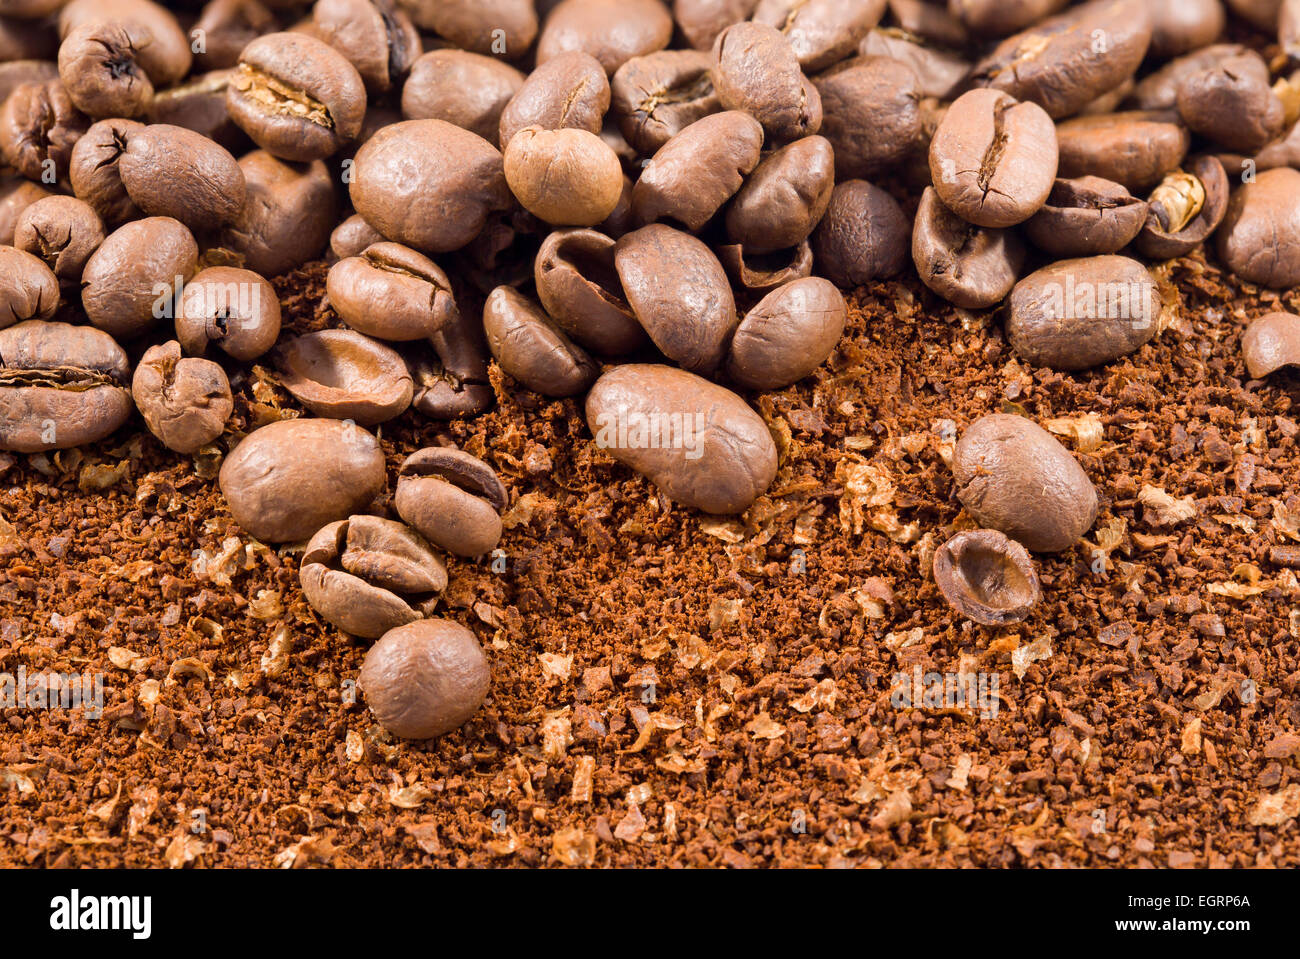 Picture of a group of coffee beans with coffee powder Stock Photo